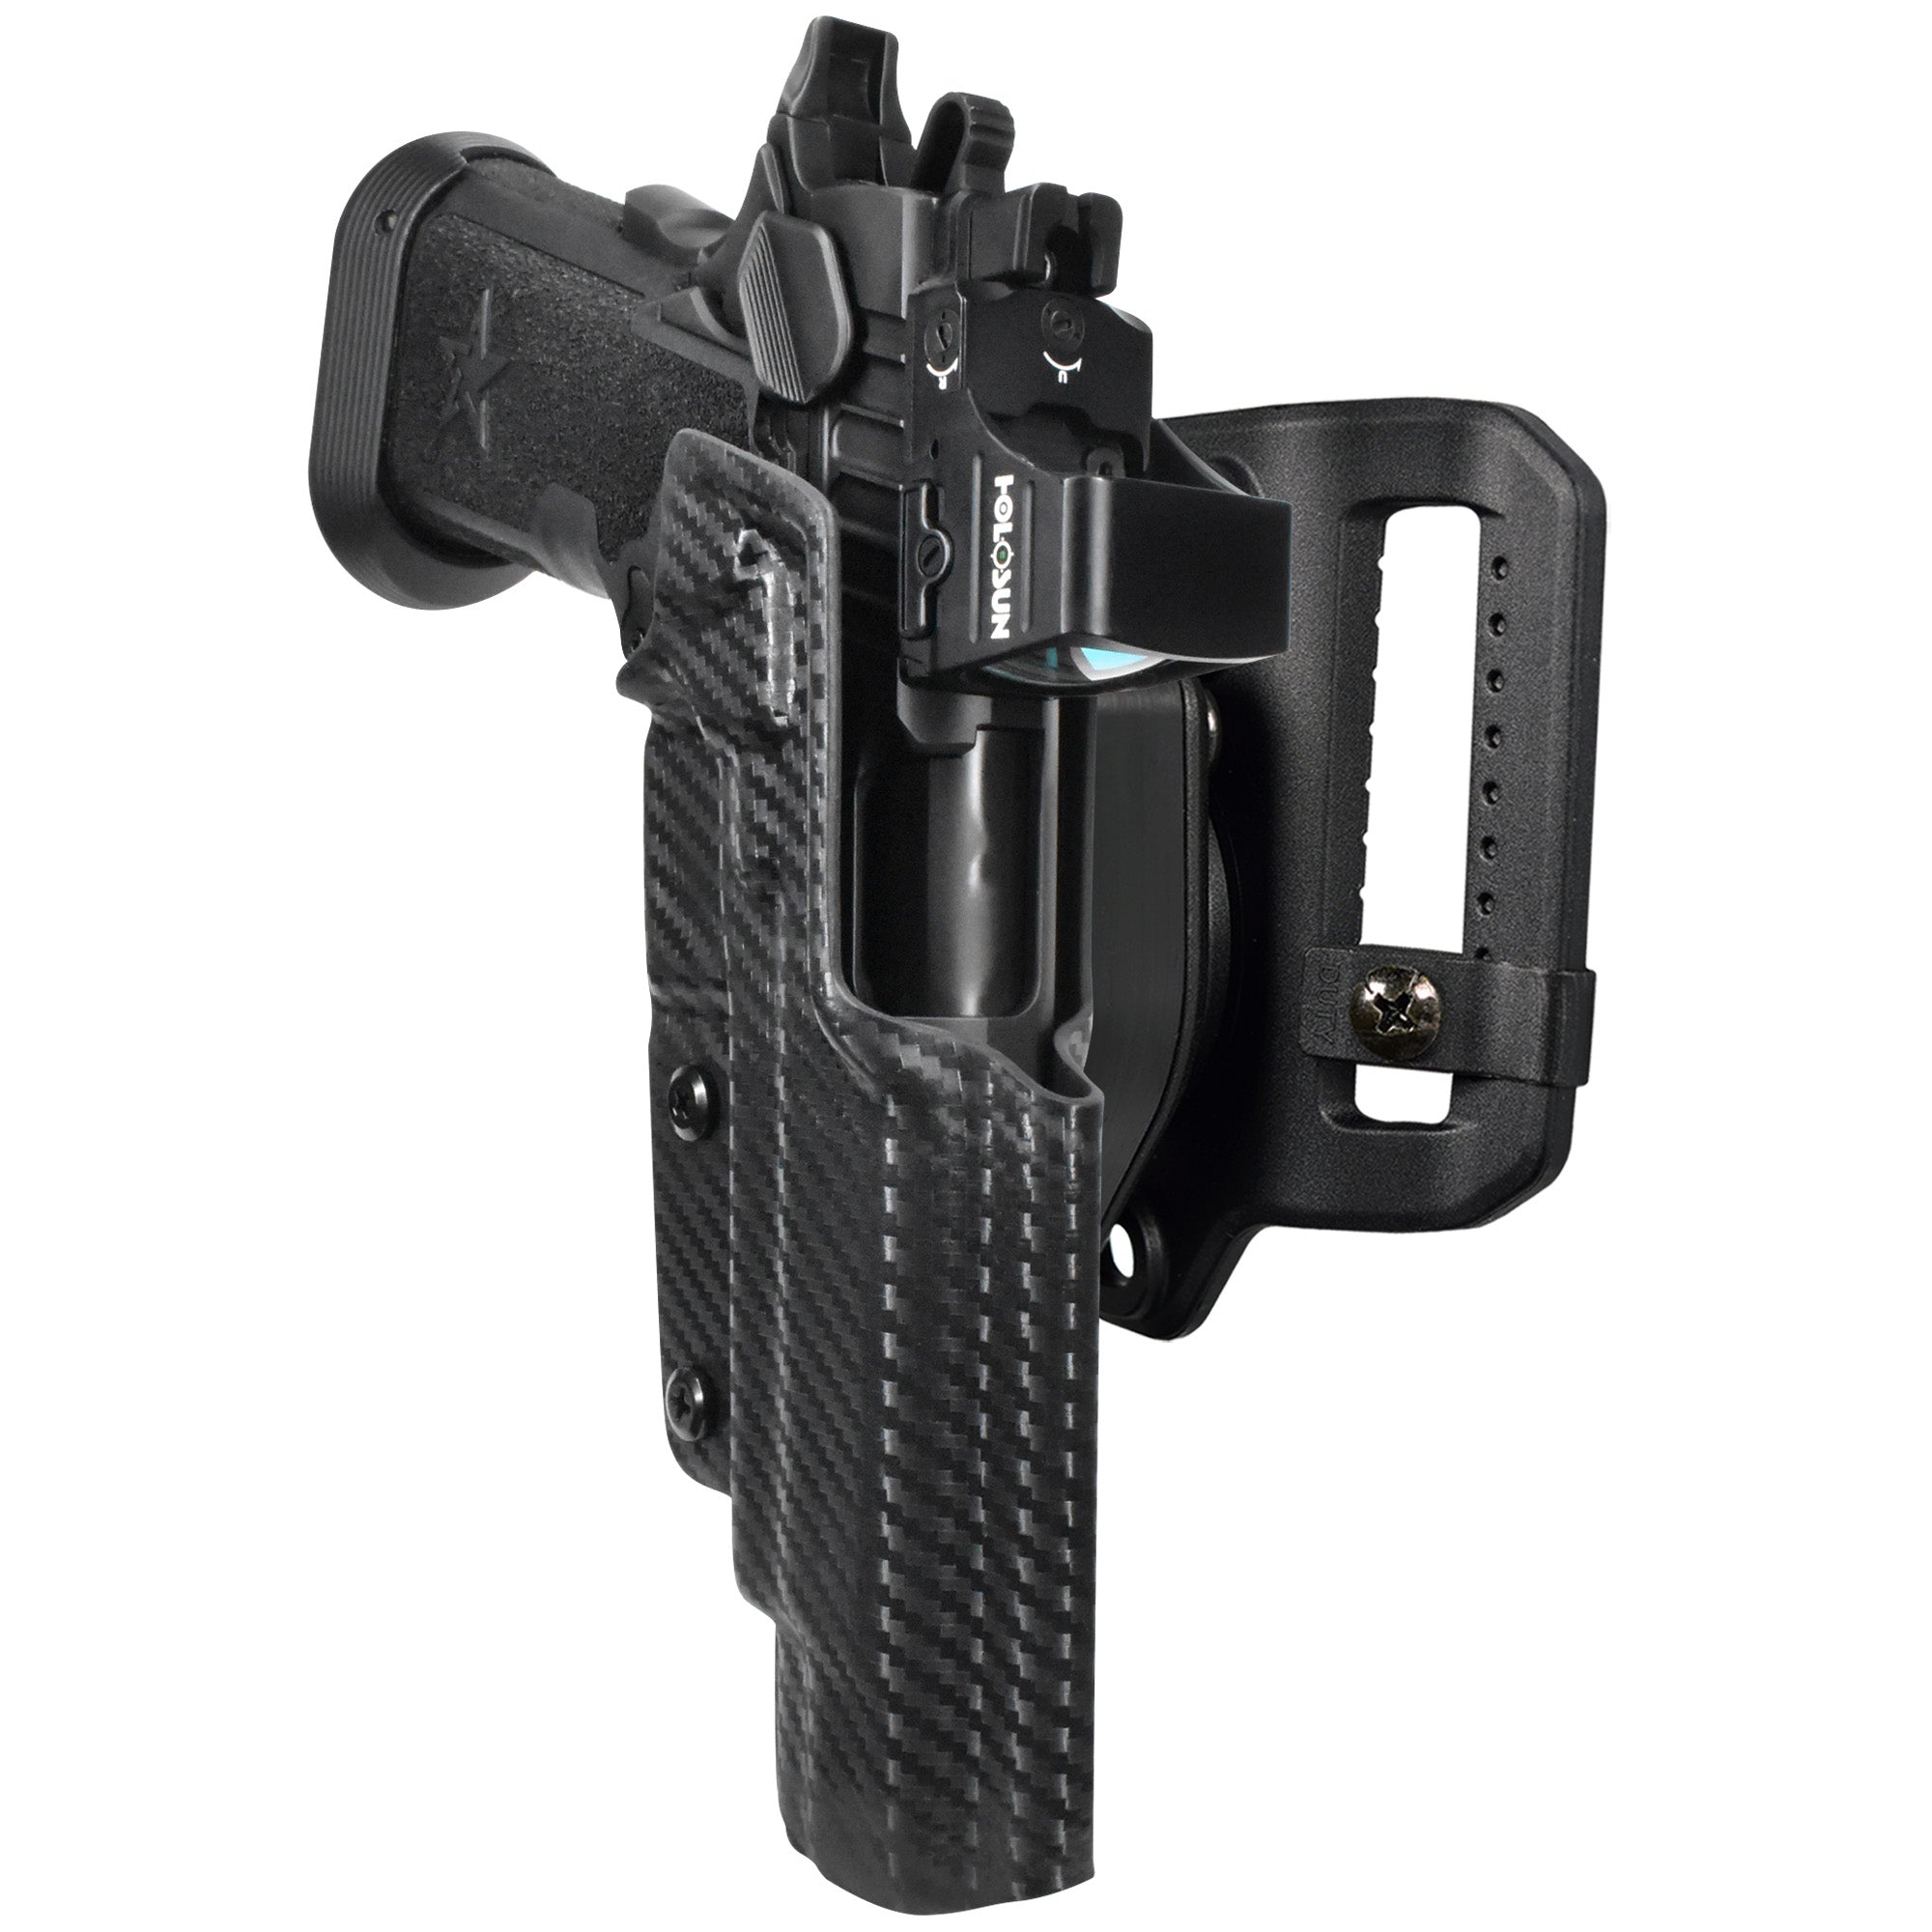 Staccato XL Quick Release Belt Loop Holster in Carbon Fiber